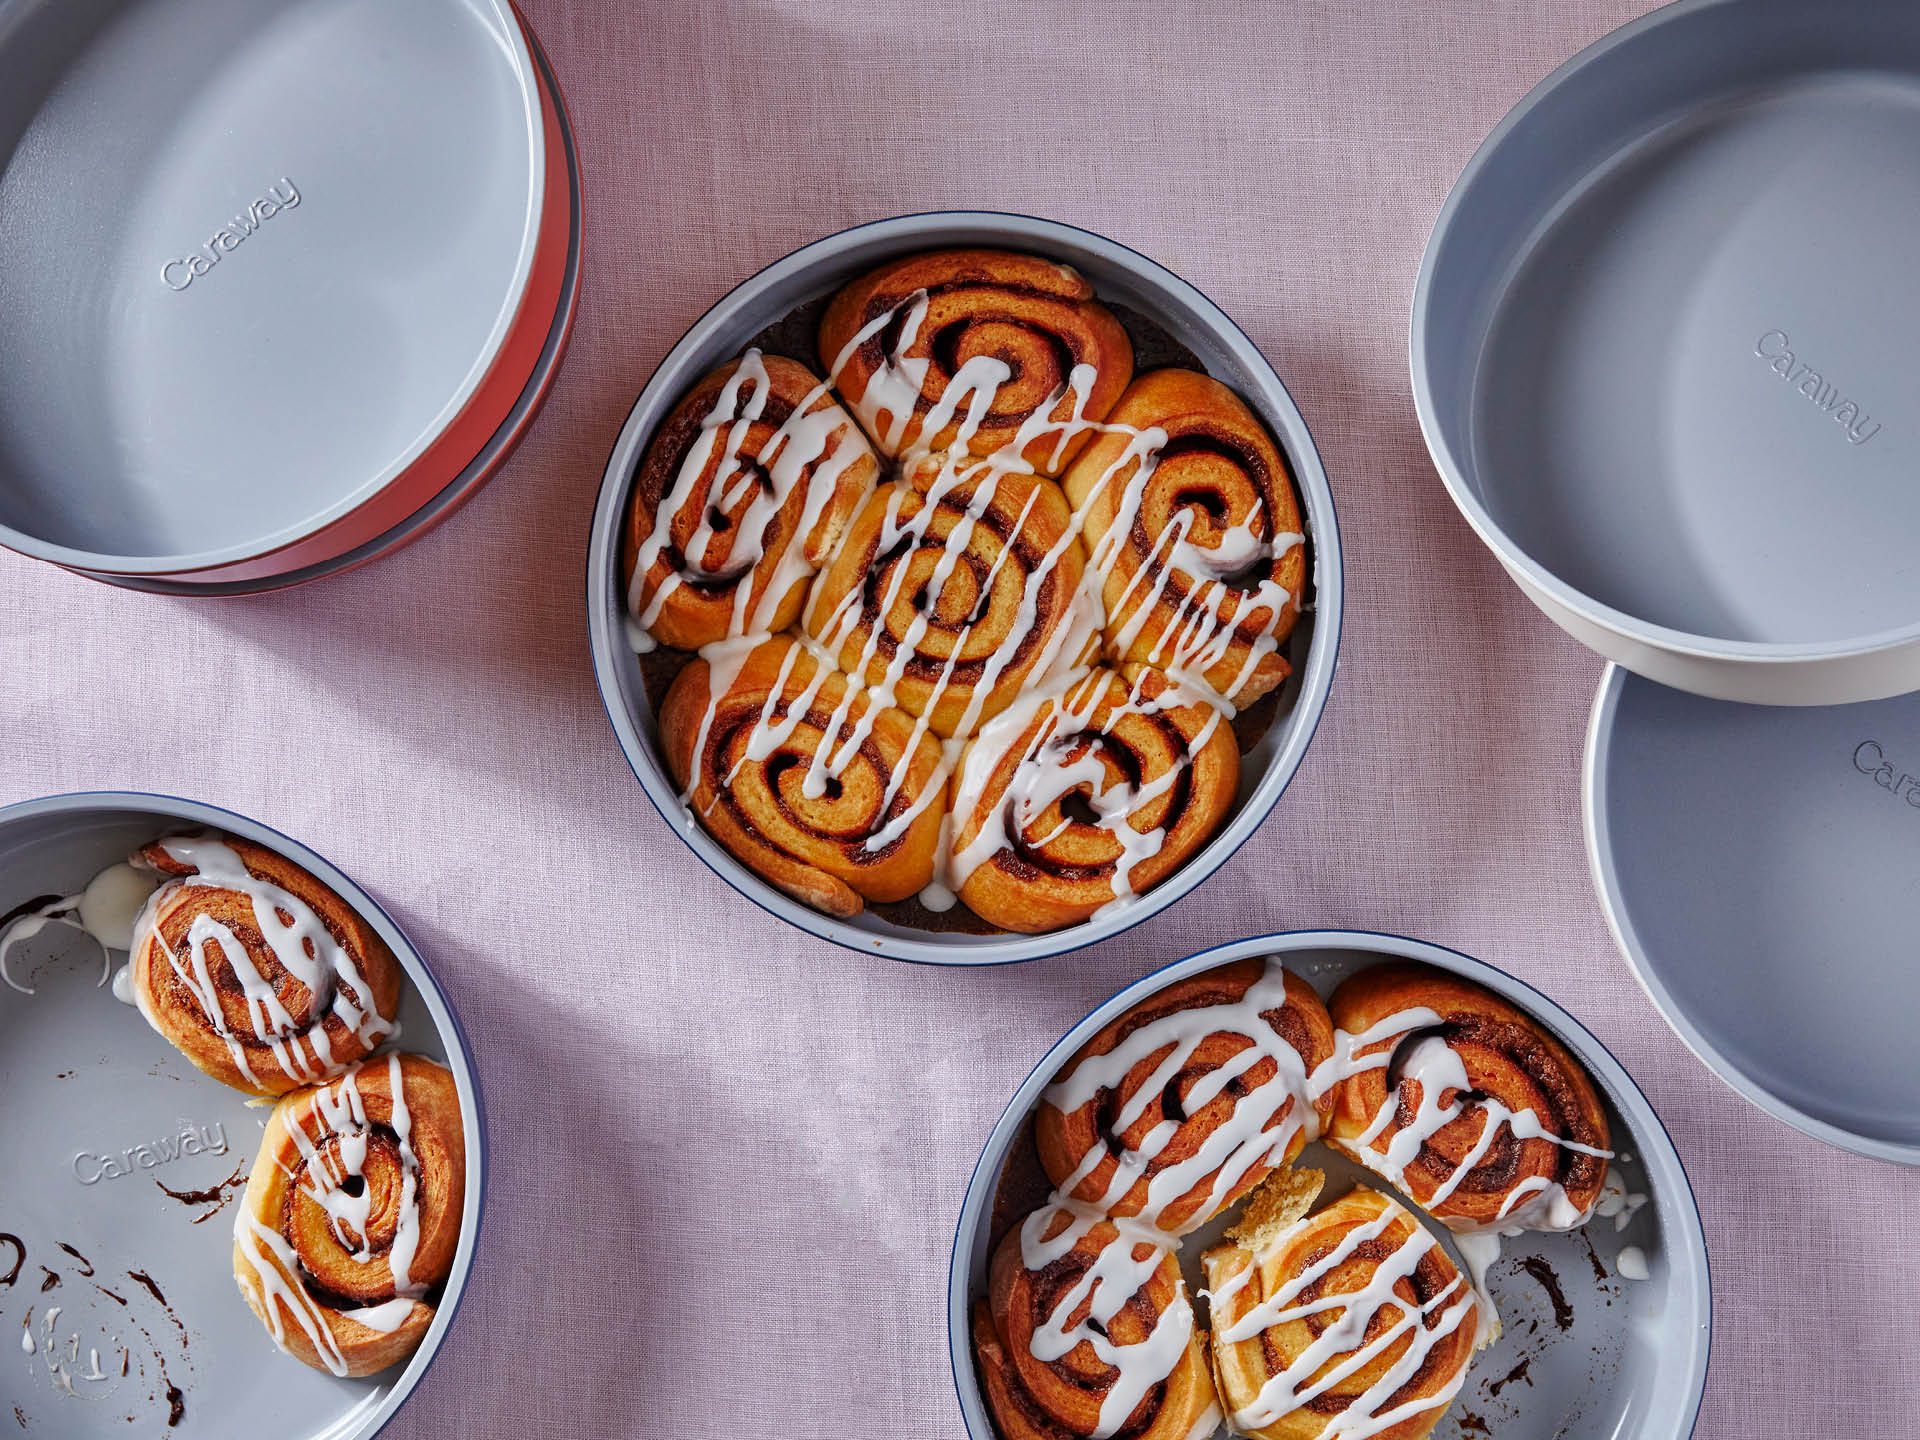 Caraway's New Bakeware Set Features Sage and Marigold Colors